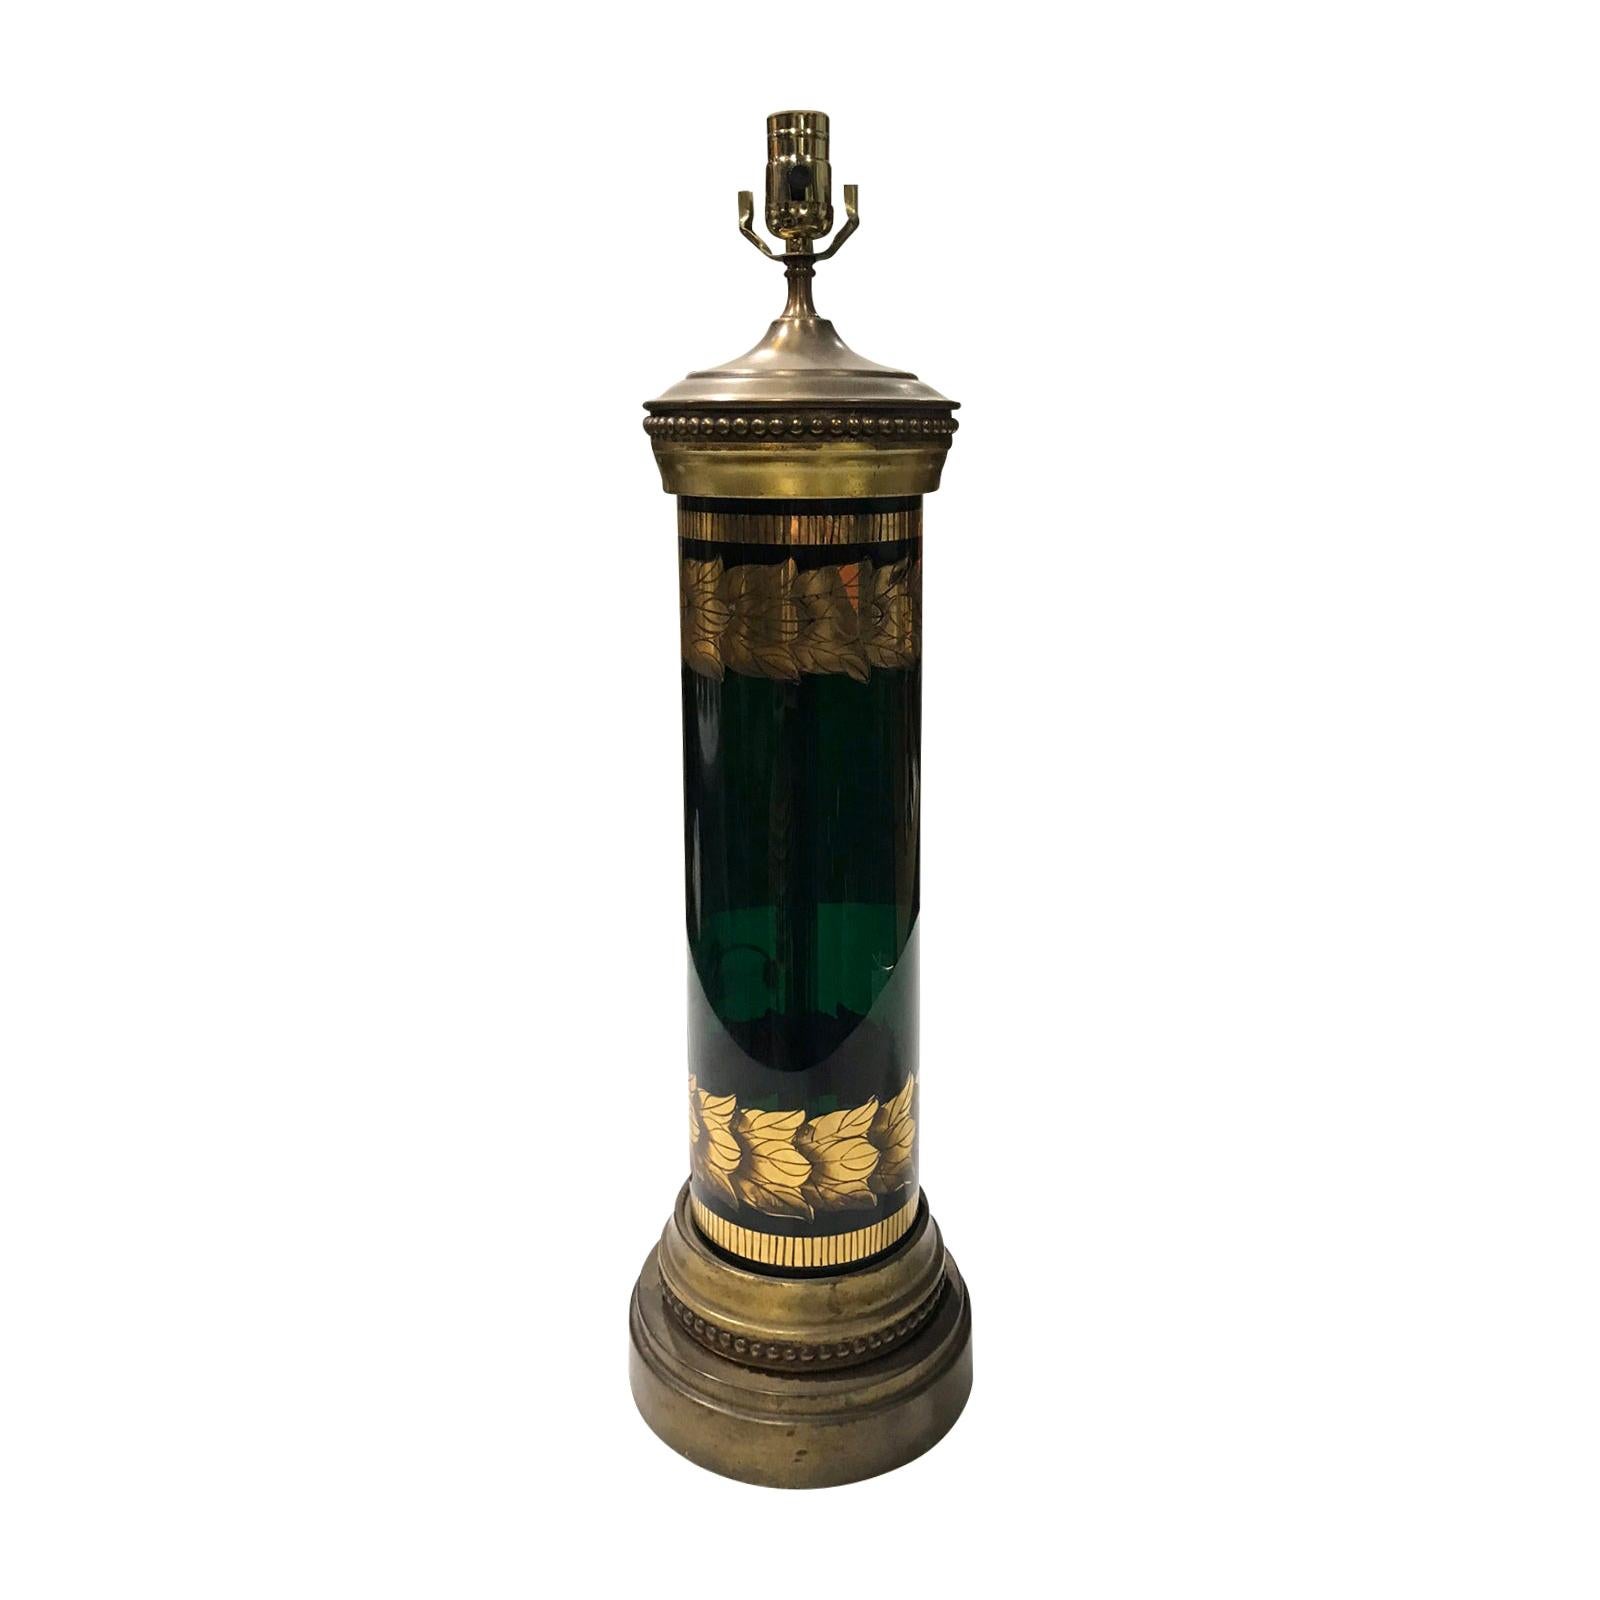 20th Century Hollywood Regency Style Gilt and Green Glass Lamp, Original Base